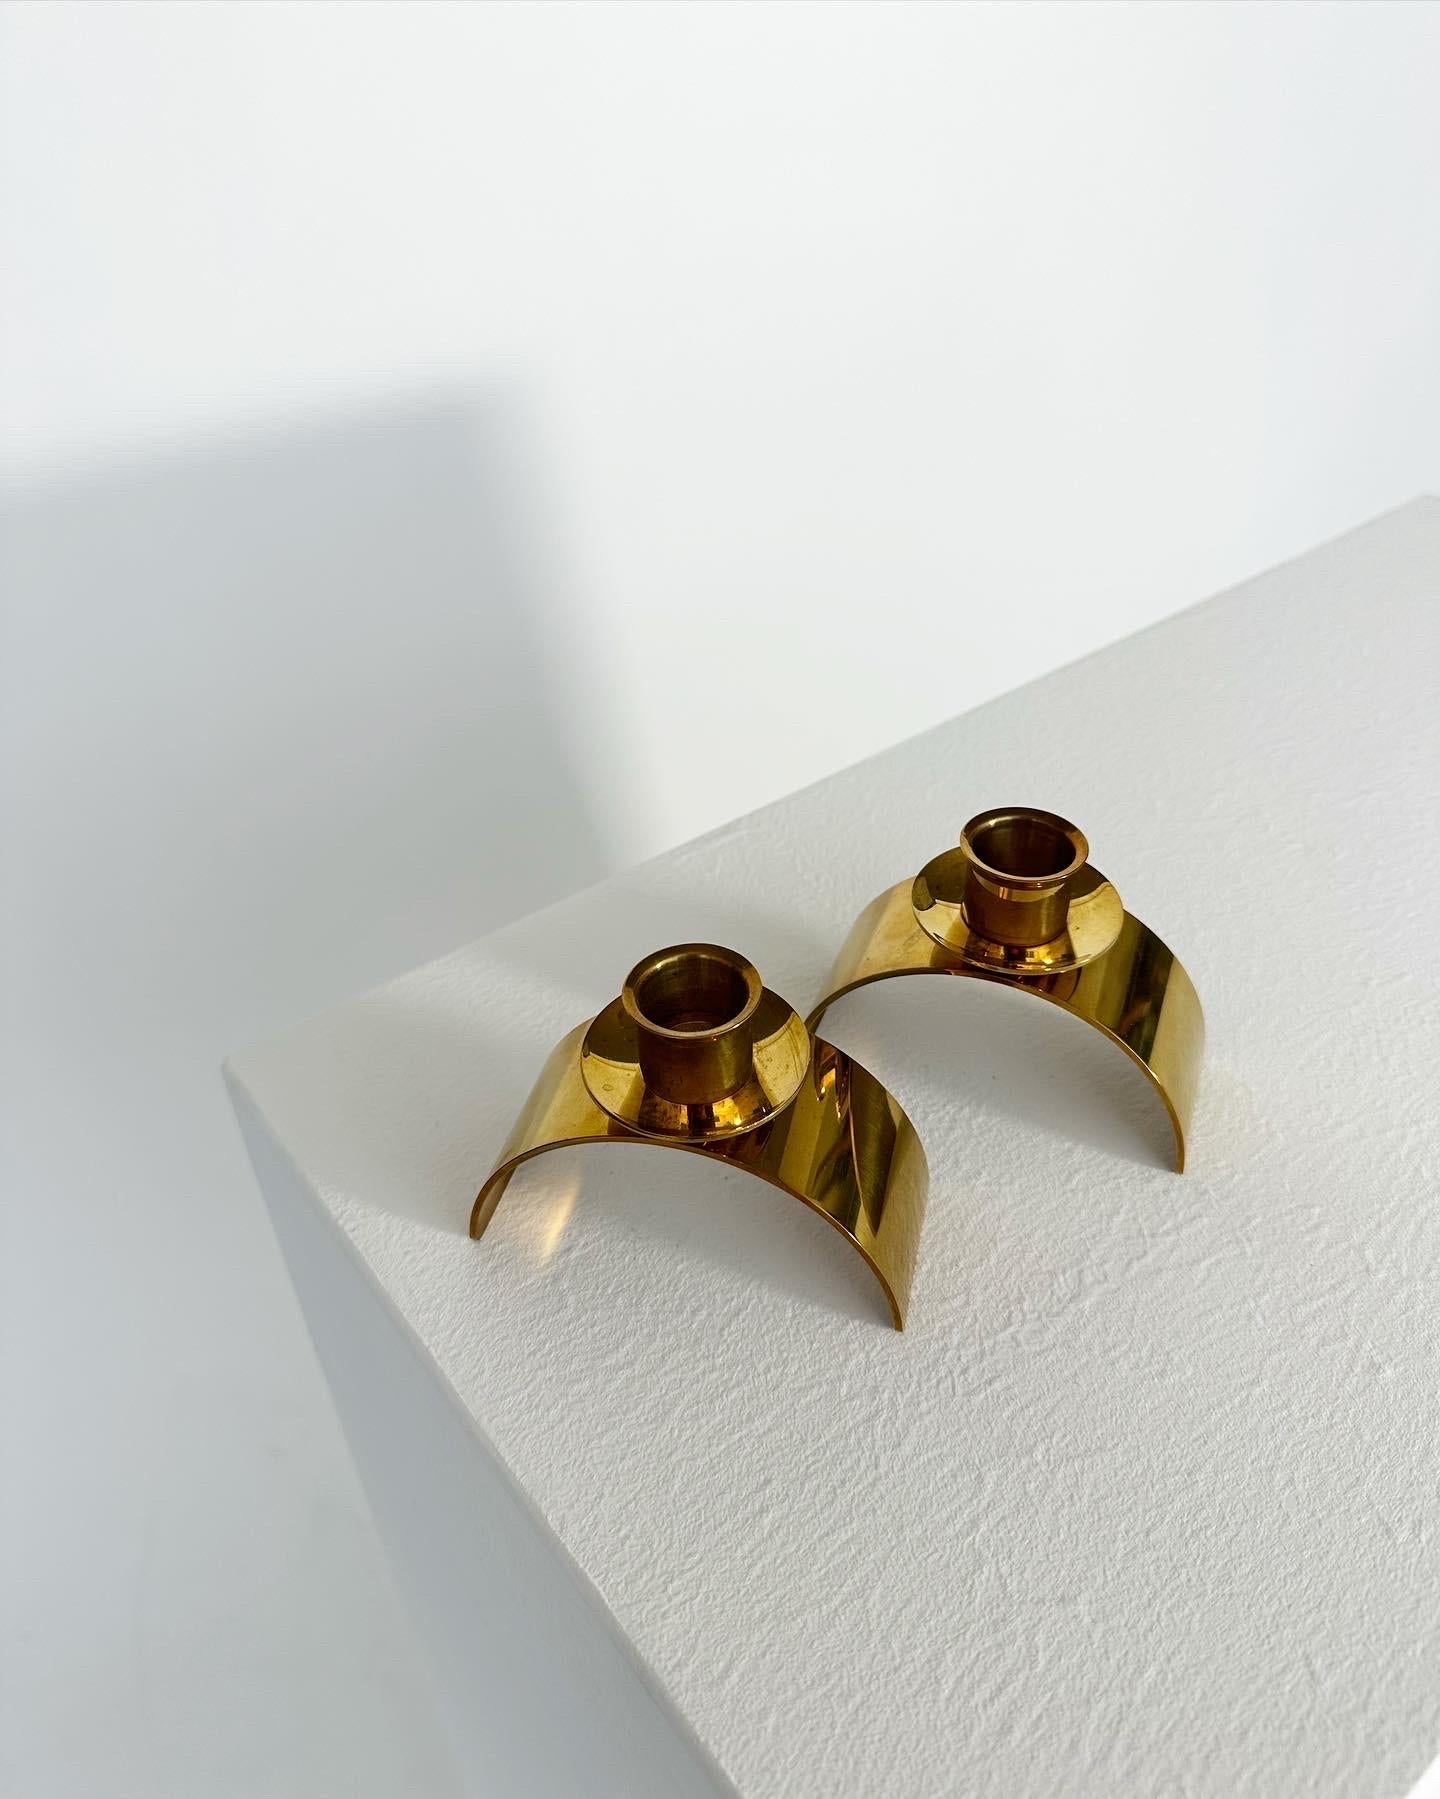 Pair of Gunnar Nylund Candle Holders Skultuna Brass Sweden, 1994 In Good Condition For Sale In Basel, BS